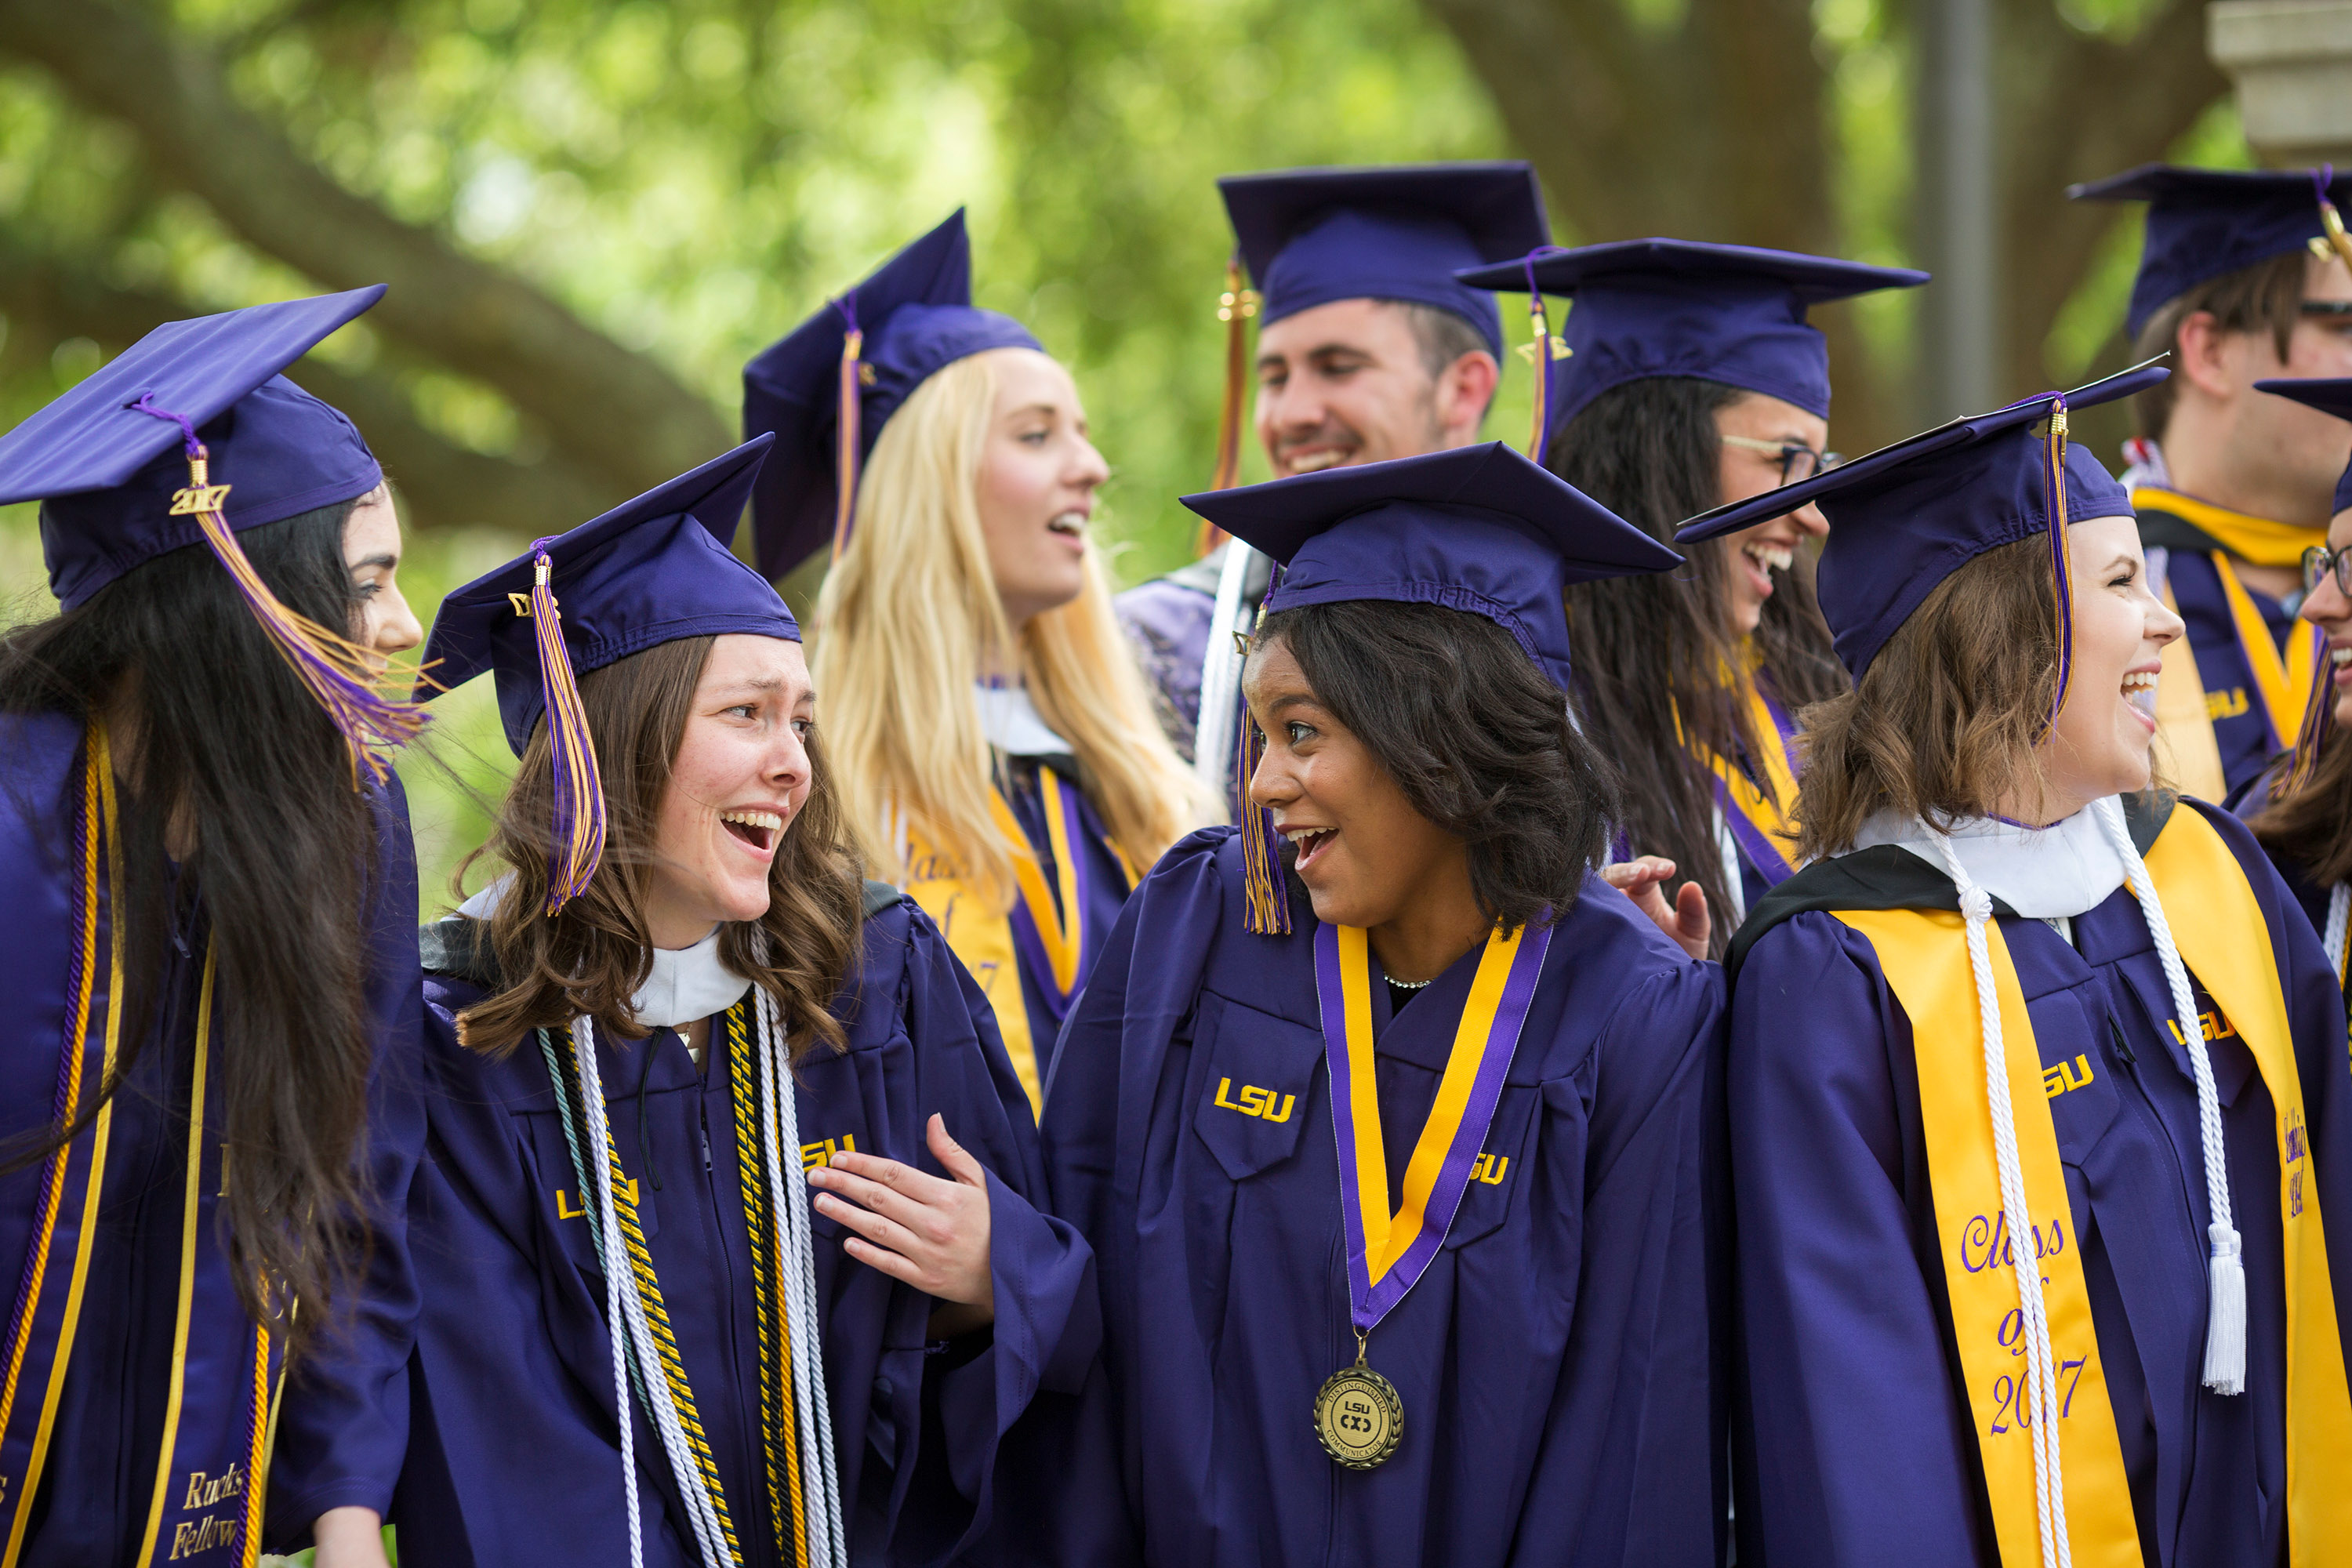 Lsu Awards A Record Number Of Degrees During Spring Commencement